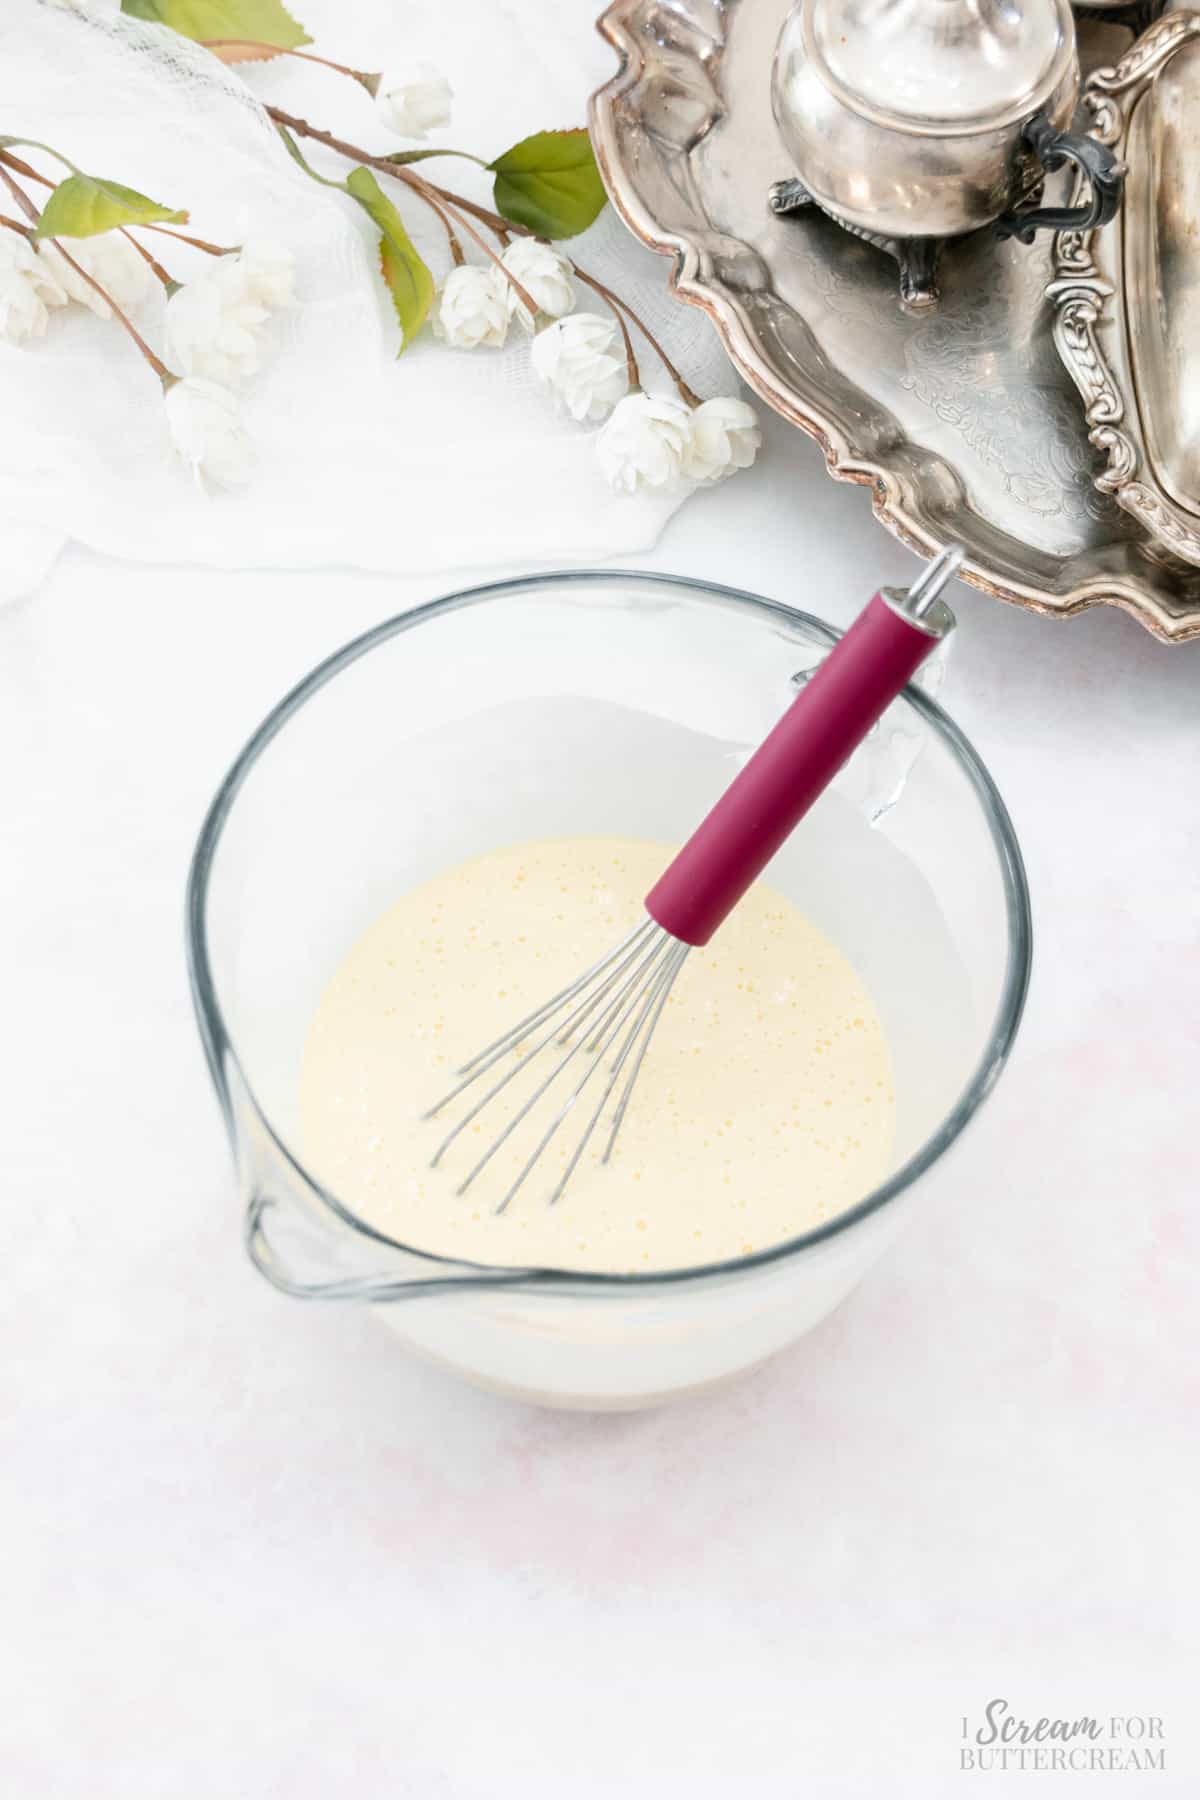 Mix the liquid cake batter in a bowl with a whisk.